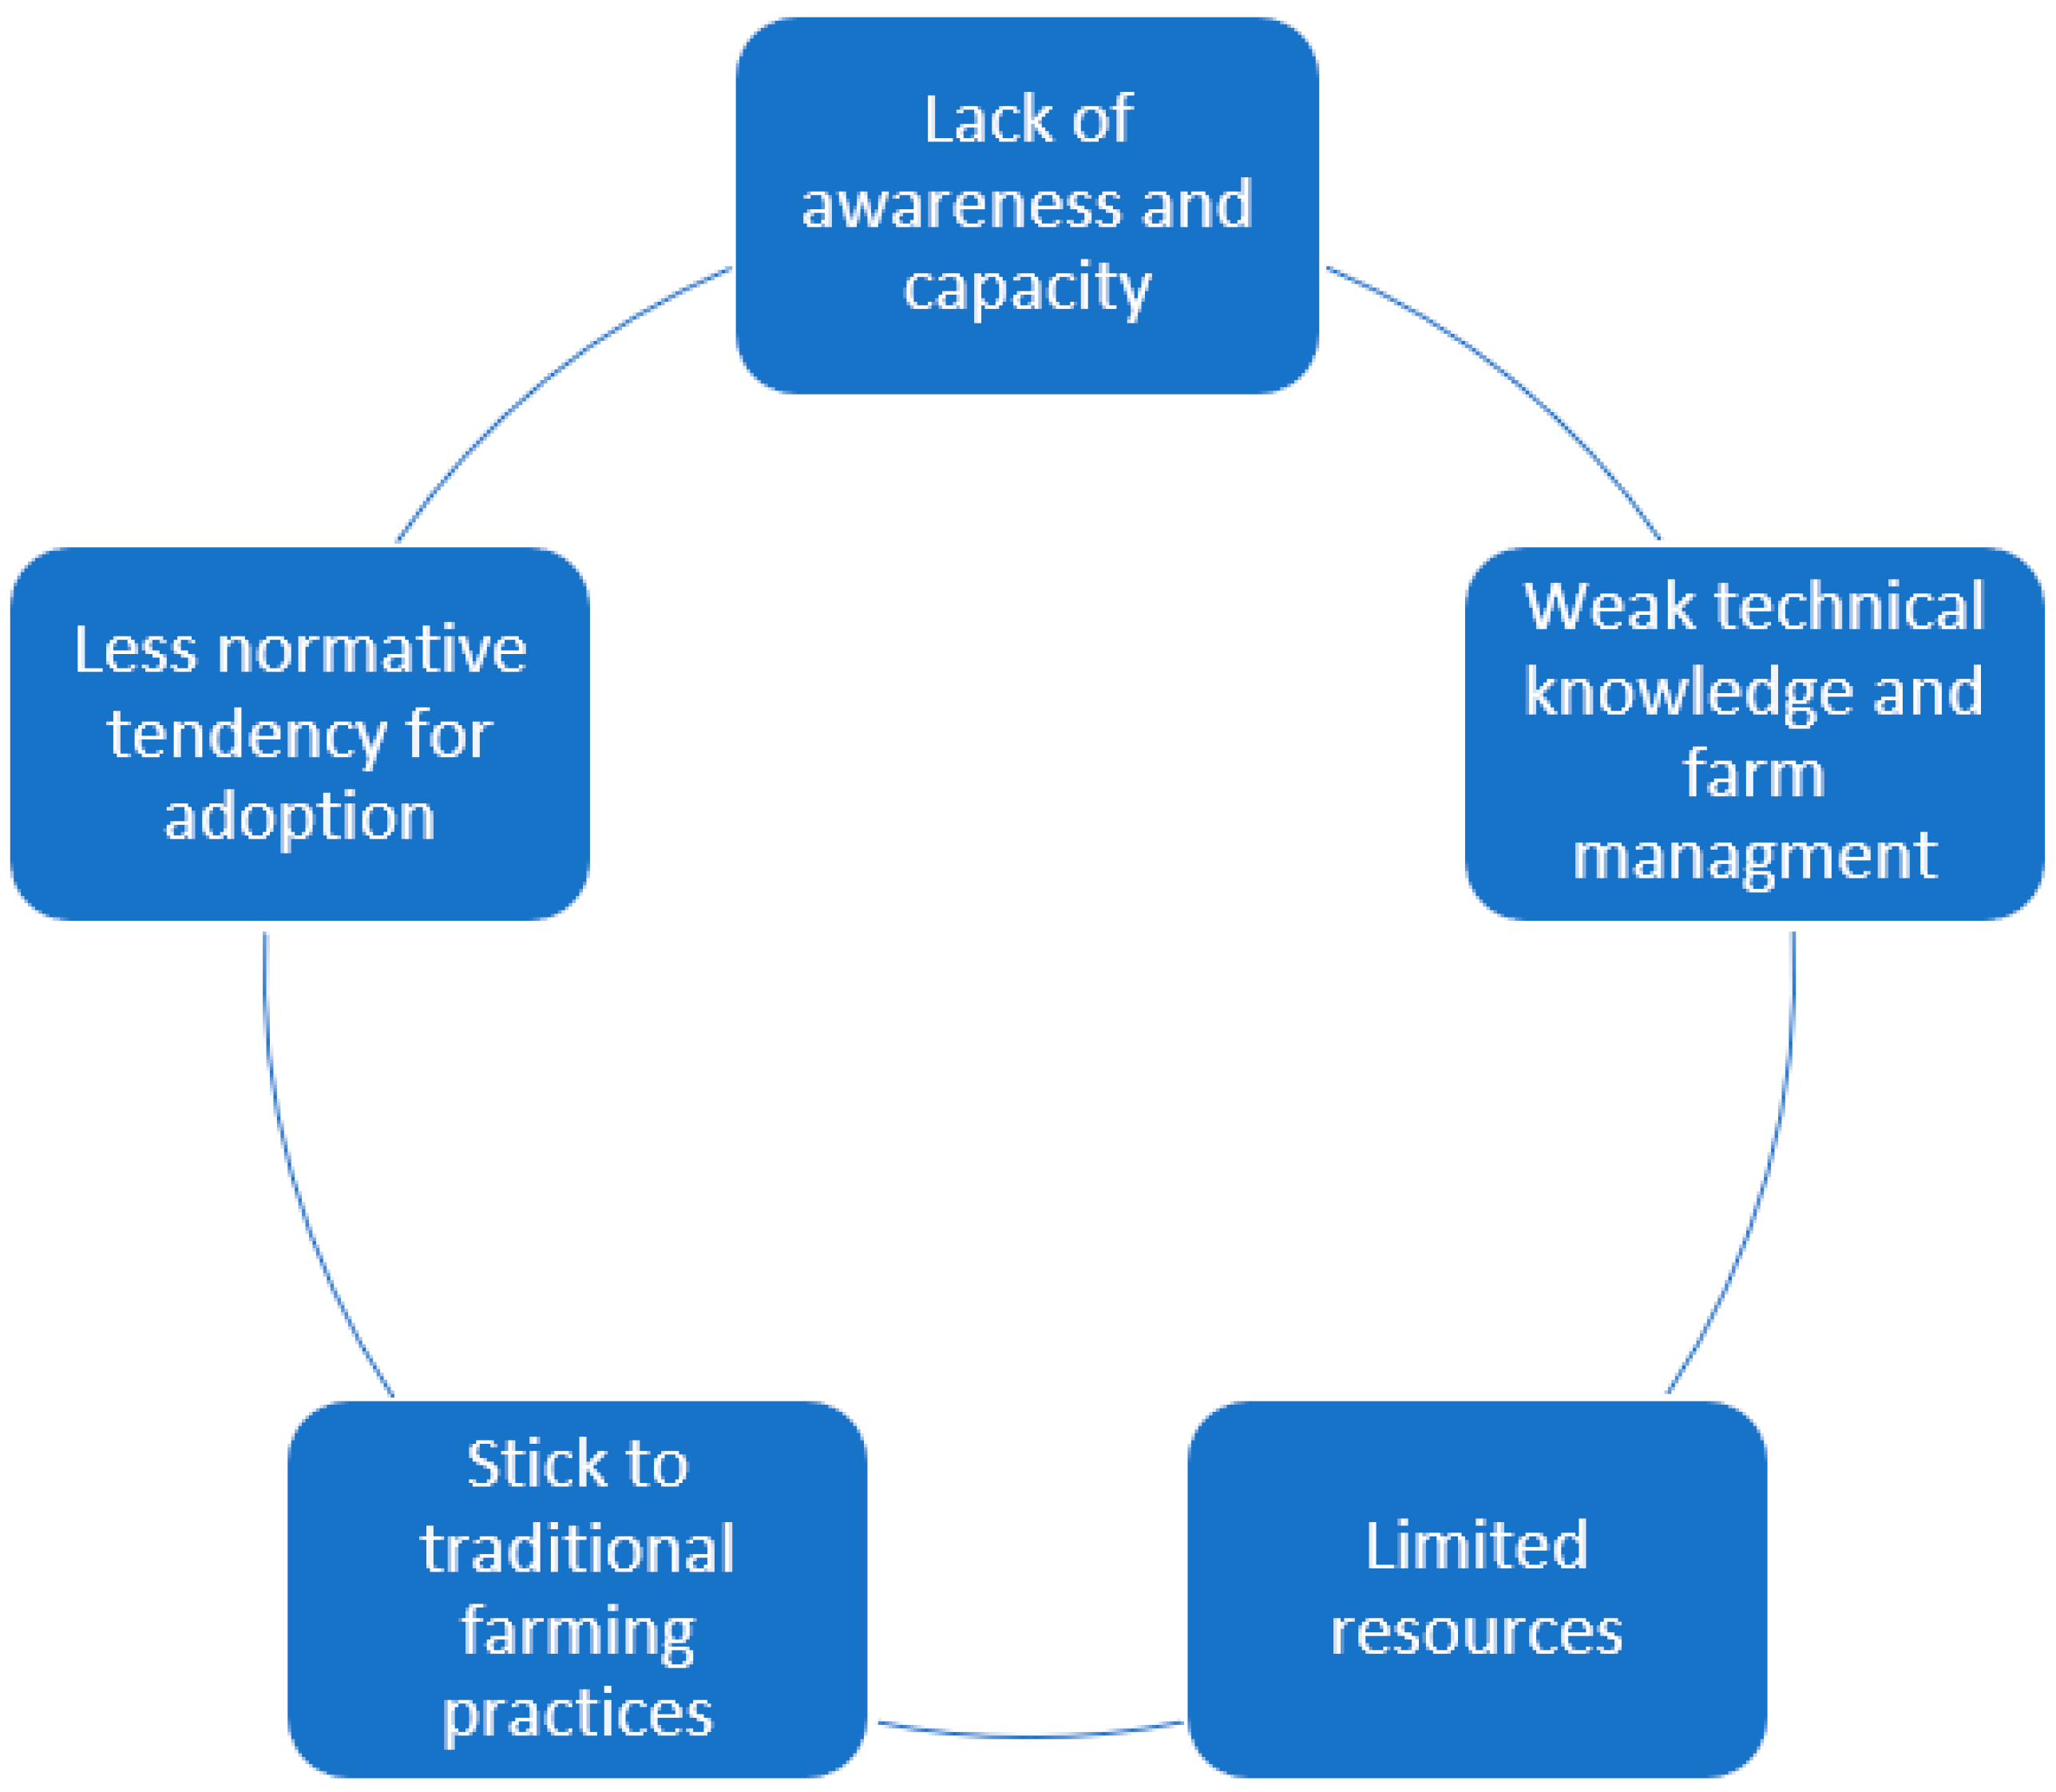 Lessons from farmers' adaptive practices to climate change in